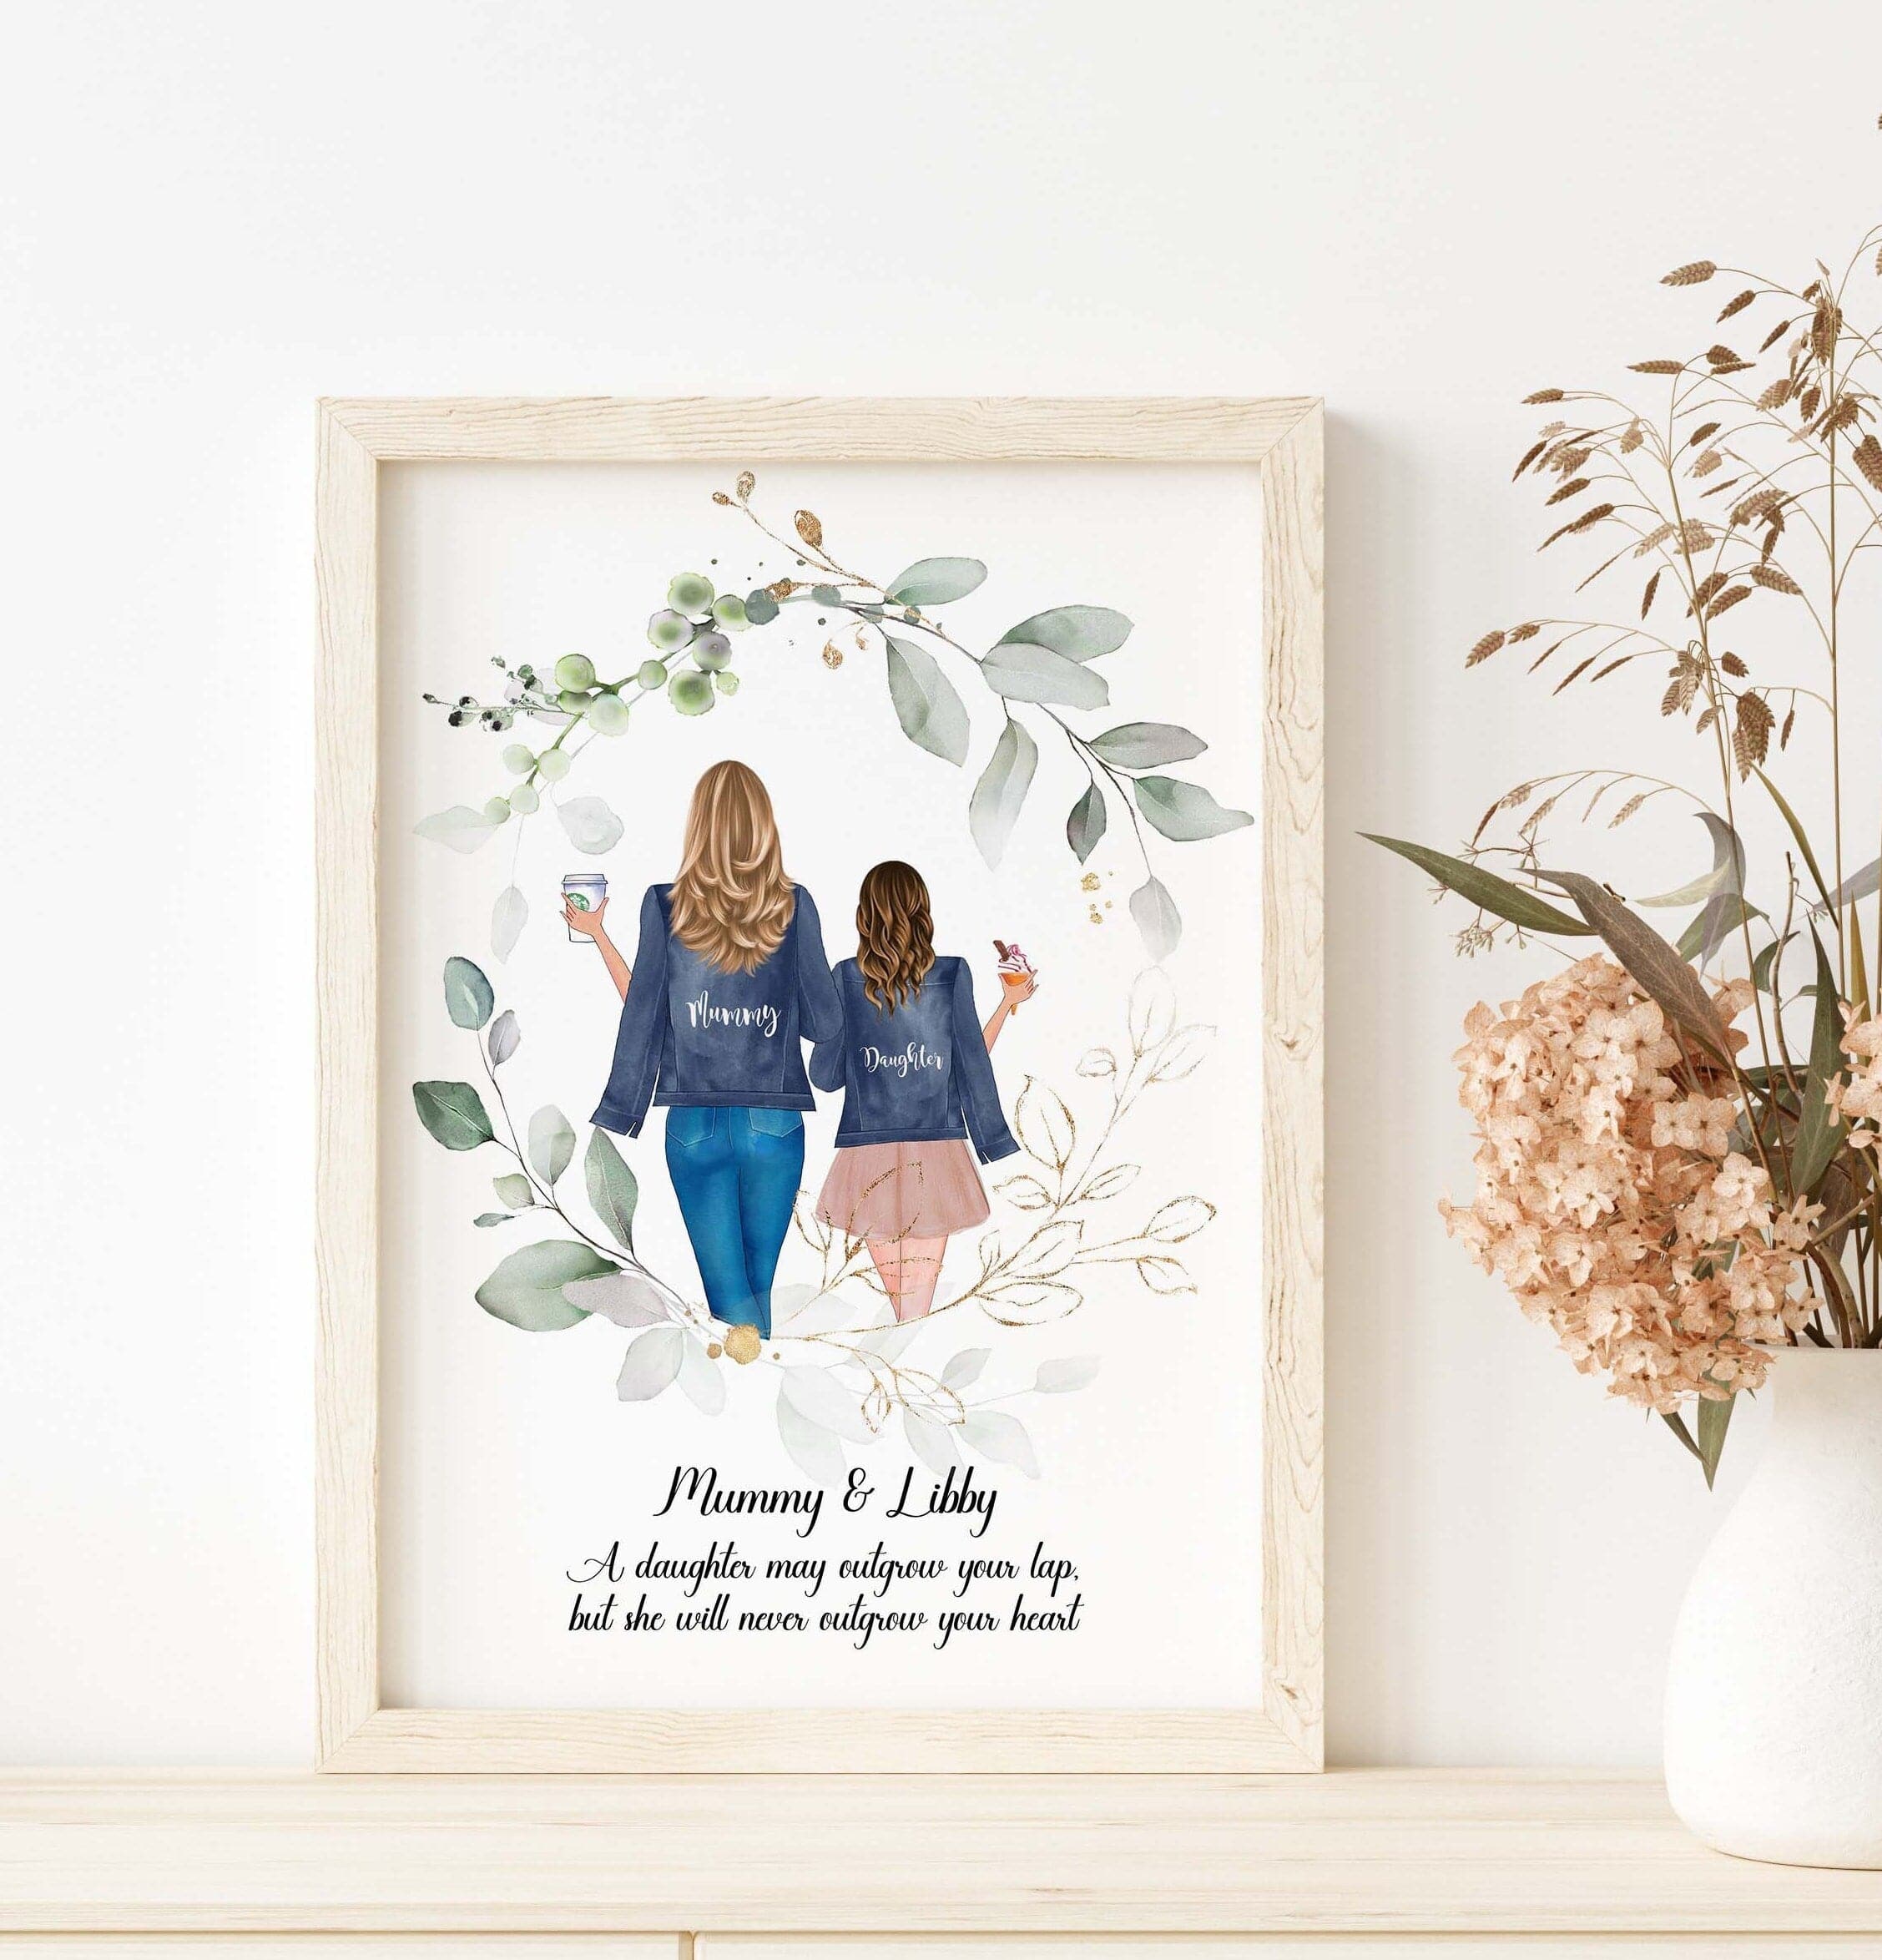 Mummy Gift, Mummy and Daughter Illustration Picture, Birthday Gift for Mum, Mothers Day Present, Gift for Mom, Gift from Child,Mum and Child